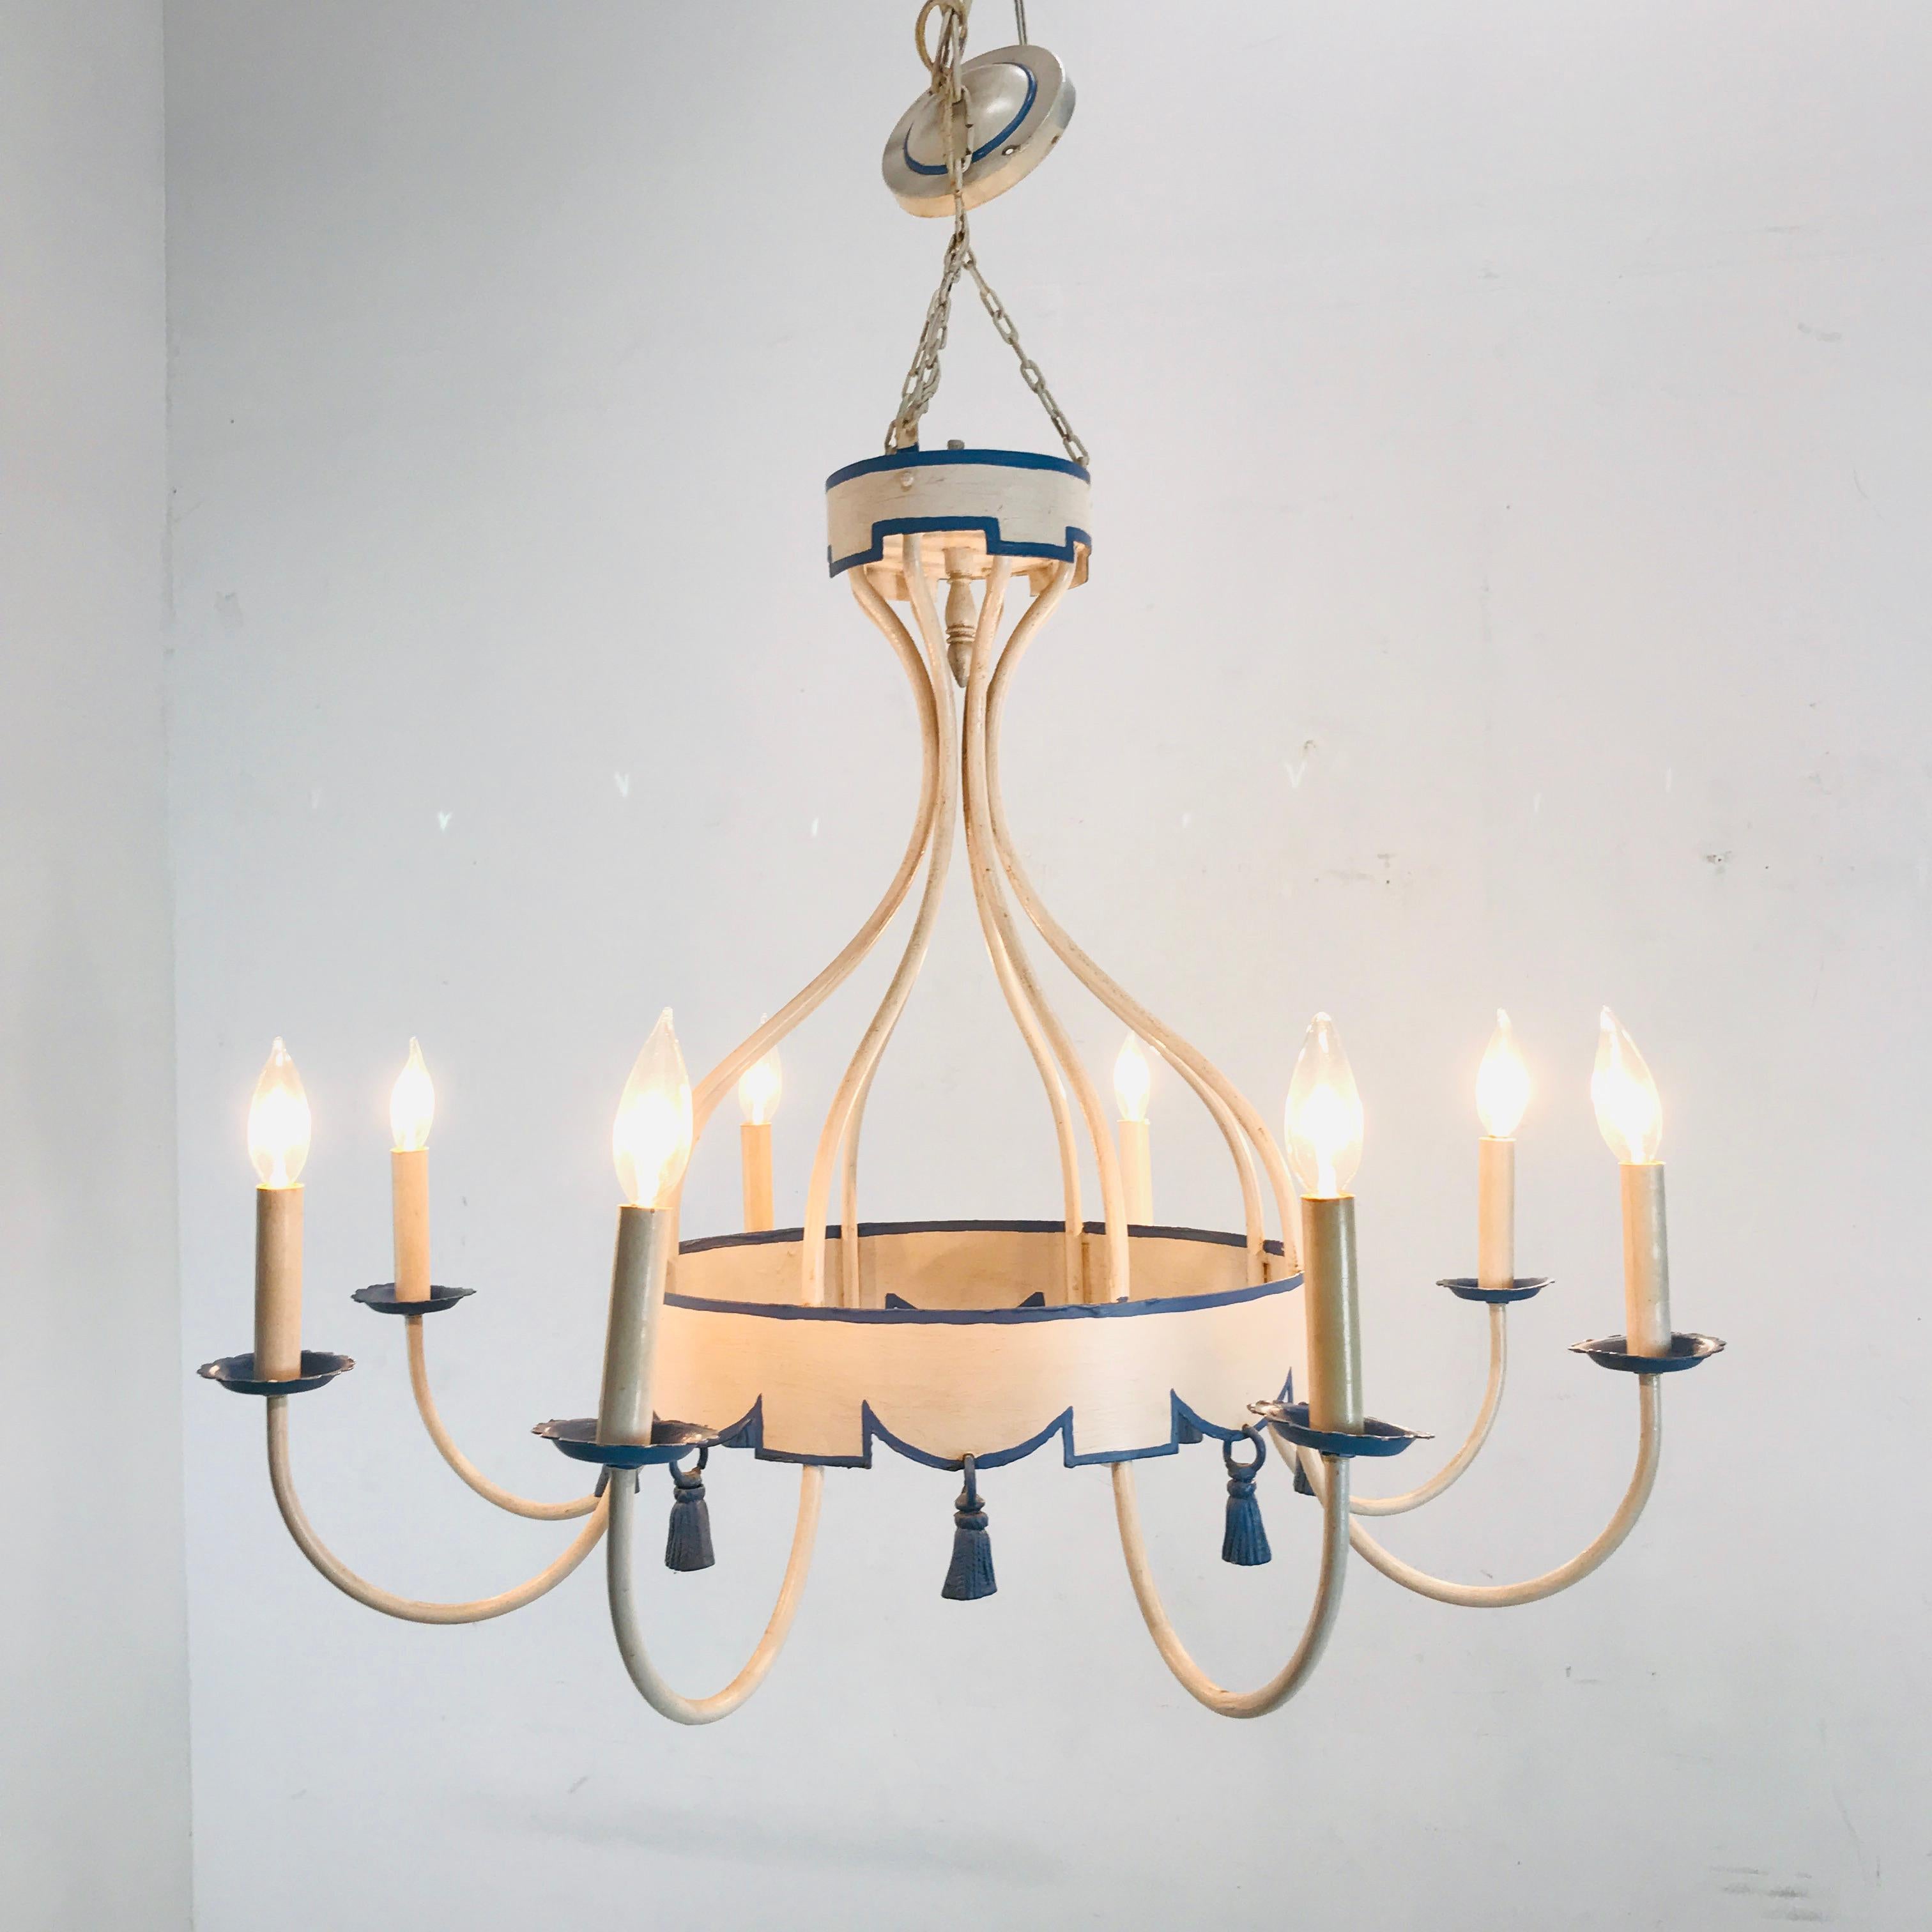 This whimsical eight light blue and white Tole tassel chandelier adds a bright and fresh look to any room. Measurement includes chain and wiring.